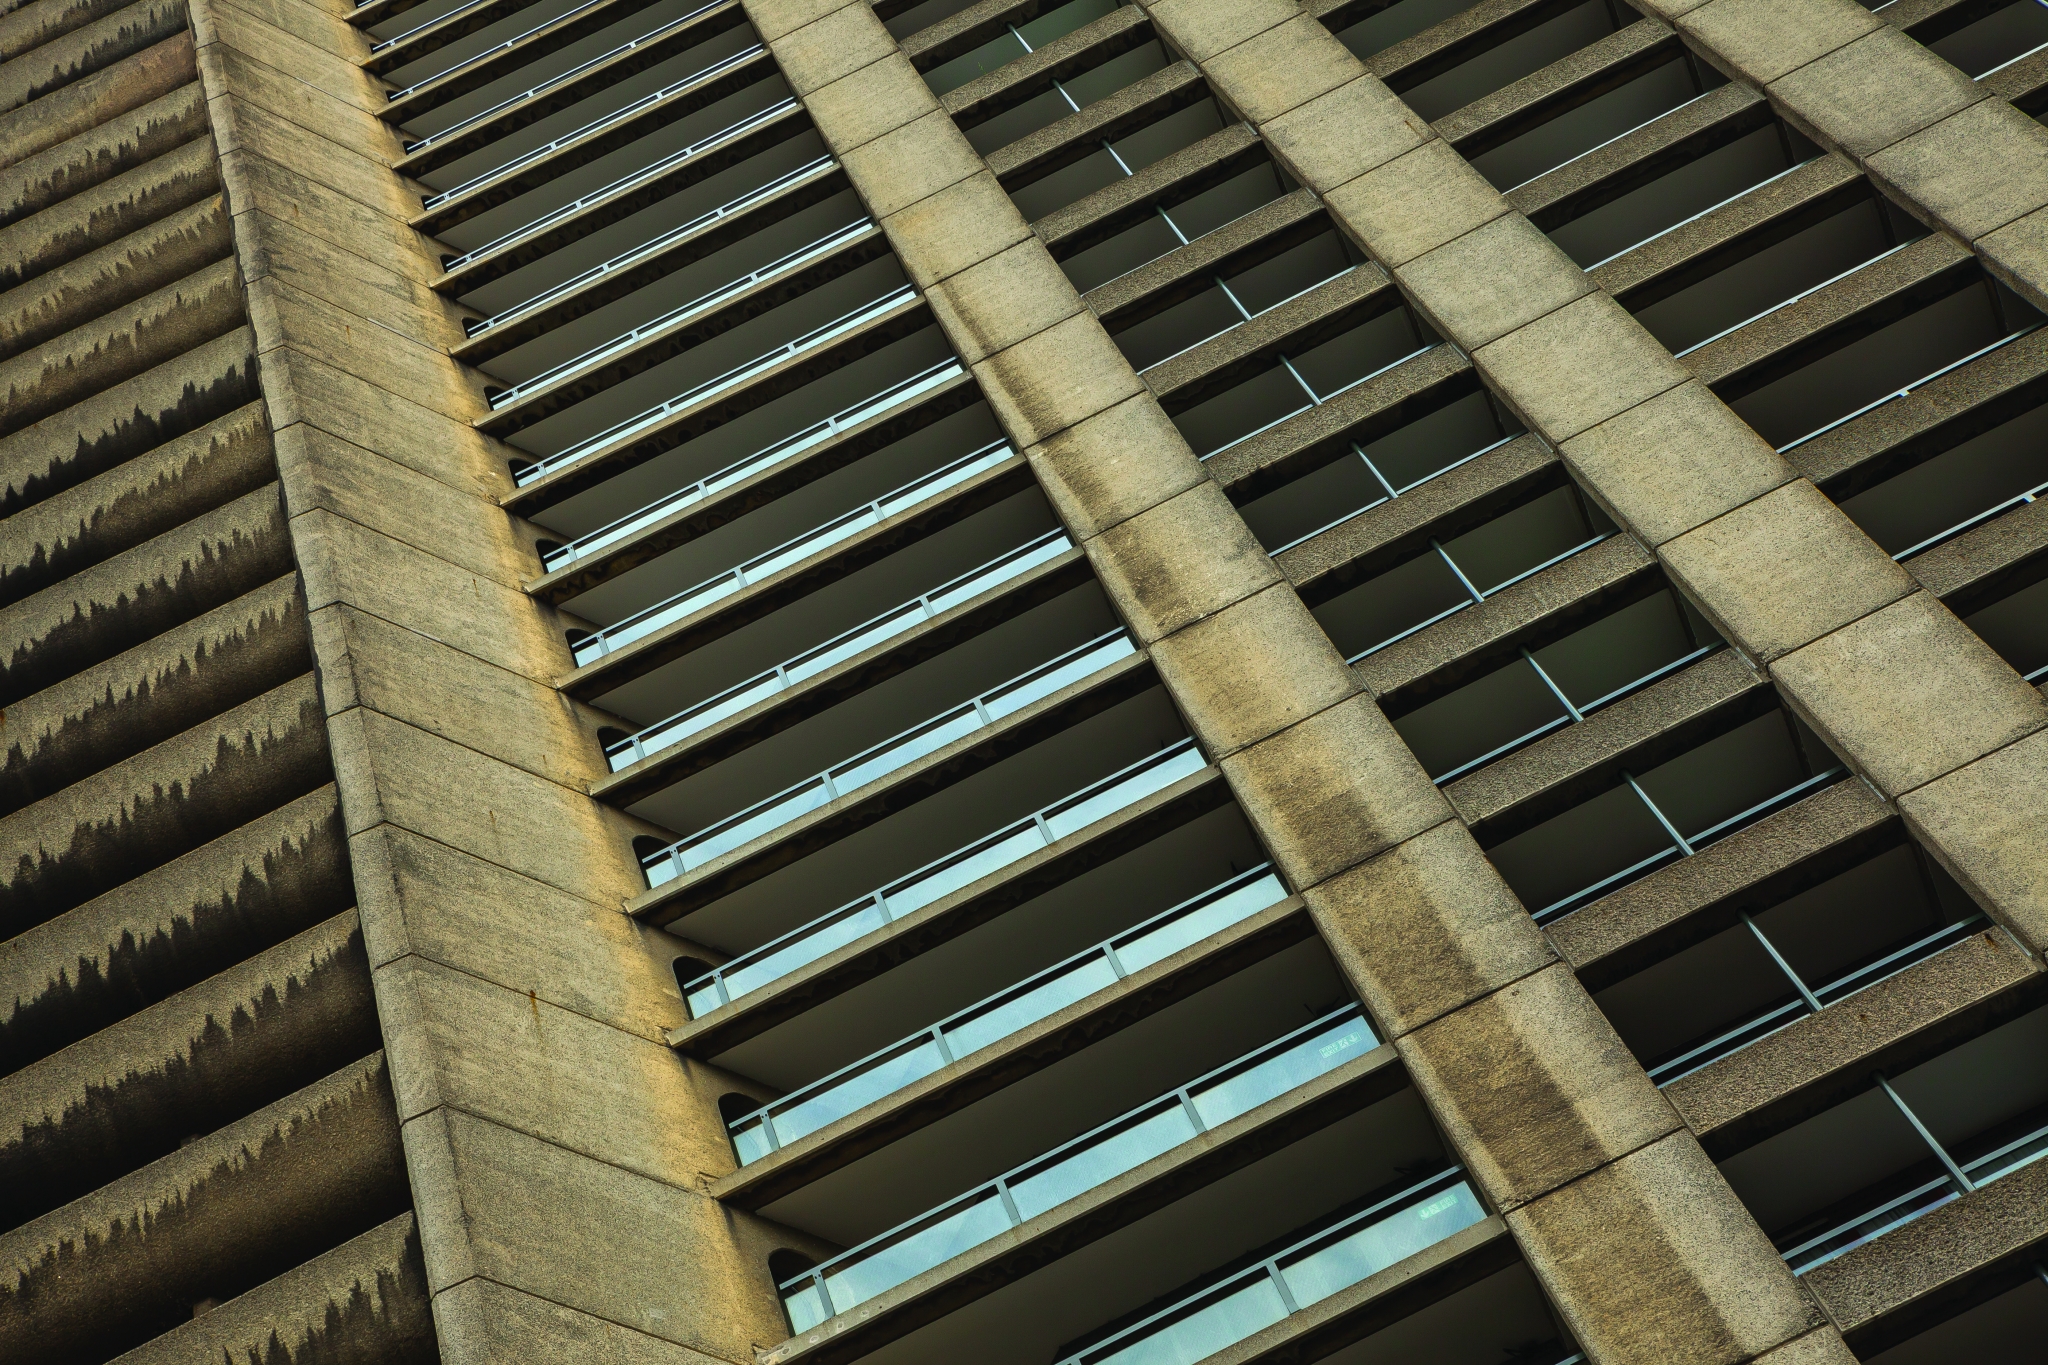 The exterior of Barbican Centre, London, showing balconies and glazing